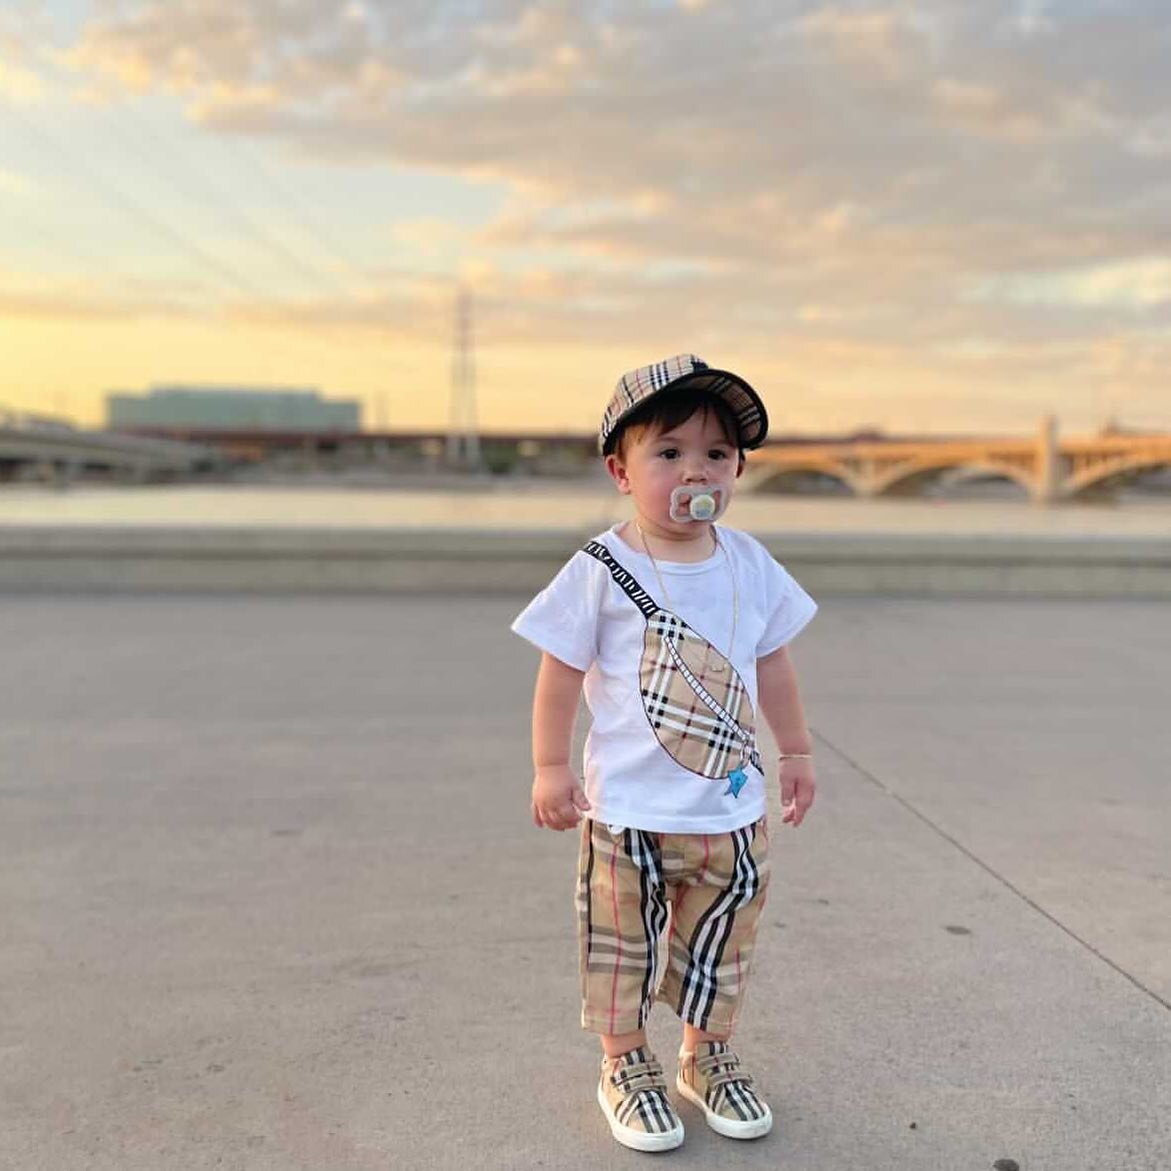 Baby looking so adorable in our tee bag set and bb cap 😍😍 
Also in black sizes starting at 12m to 7y 
Www.Bossykidz.com